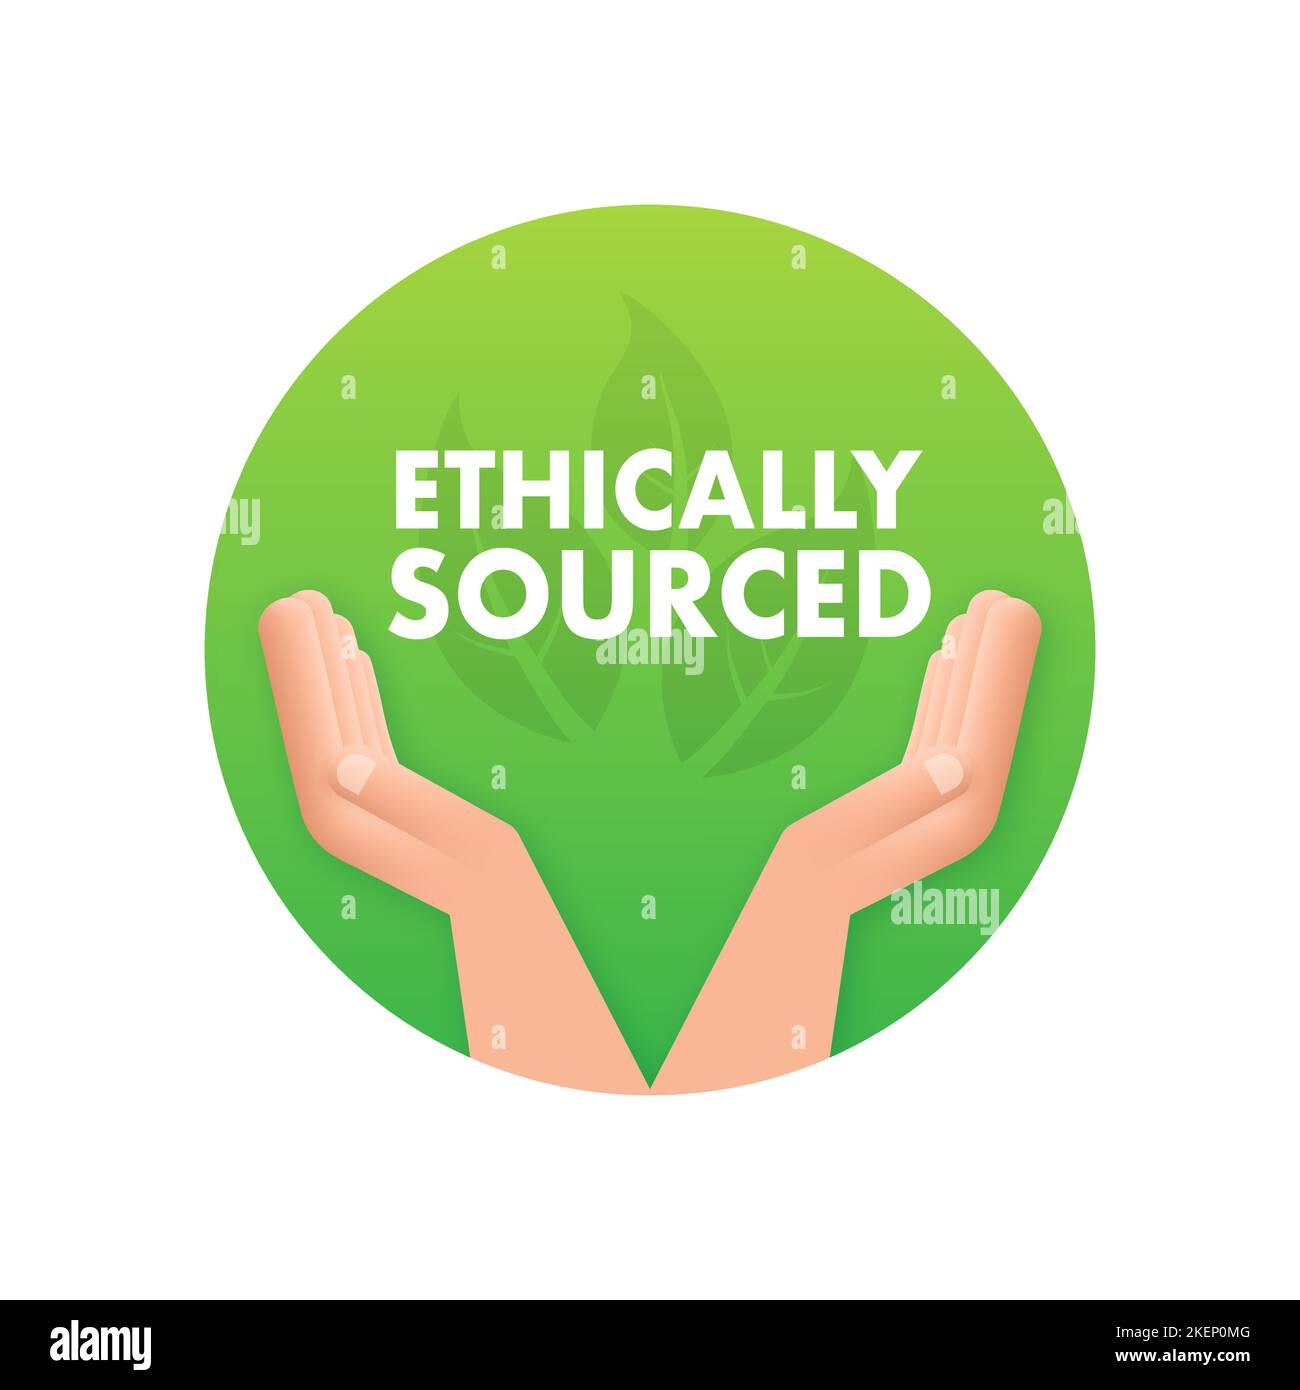 Ethically Sourced Ingredients